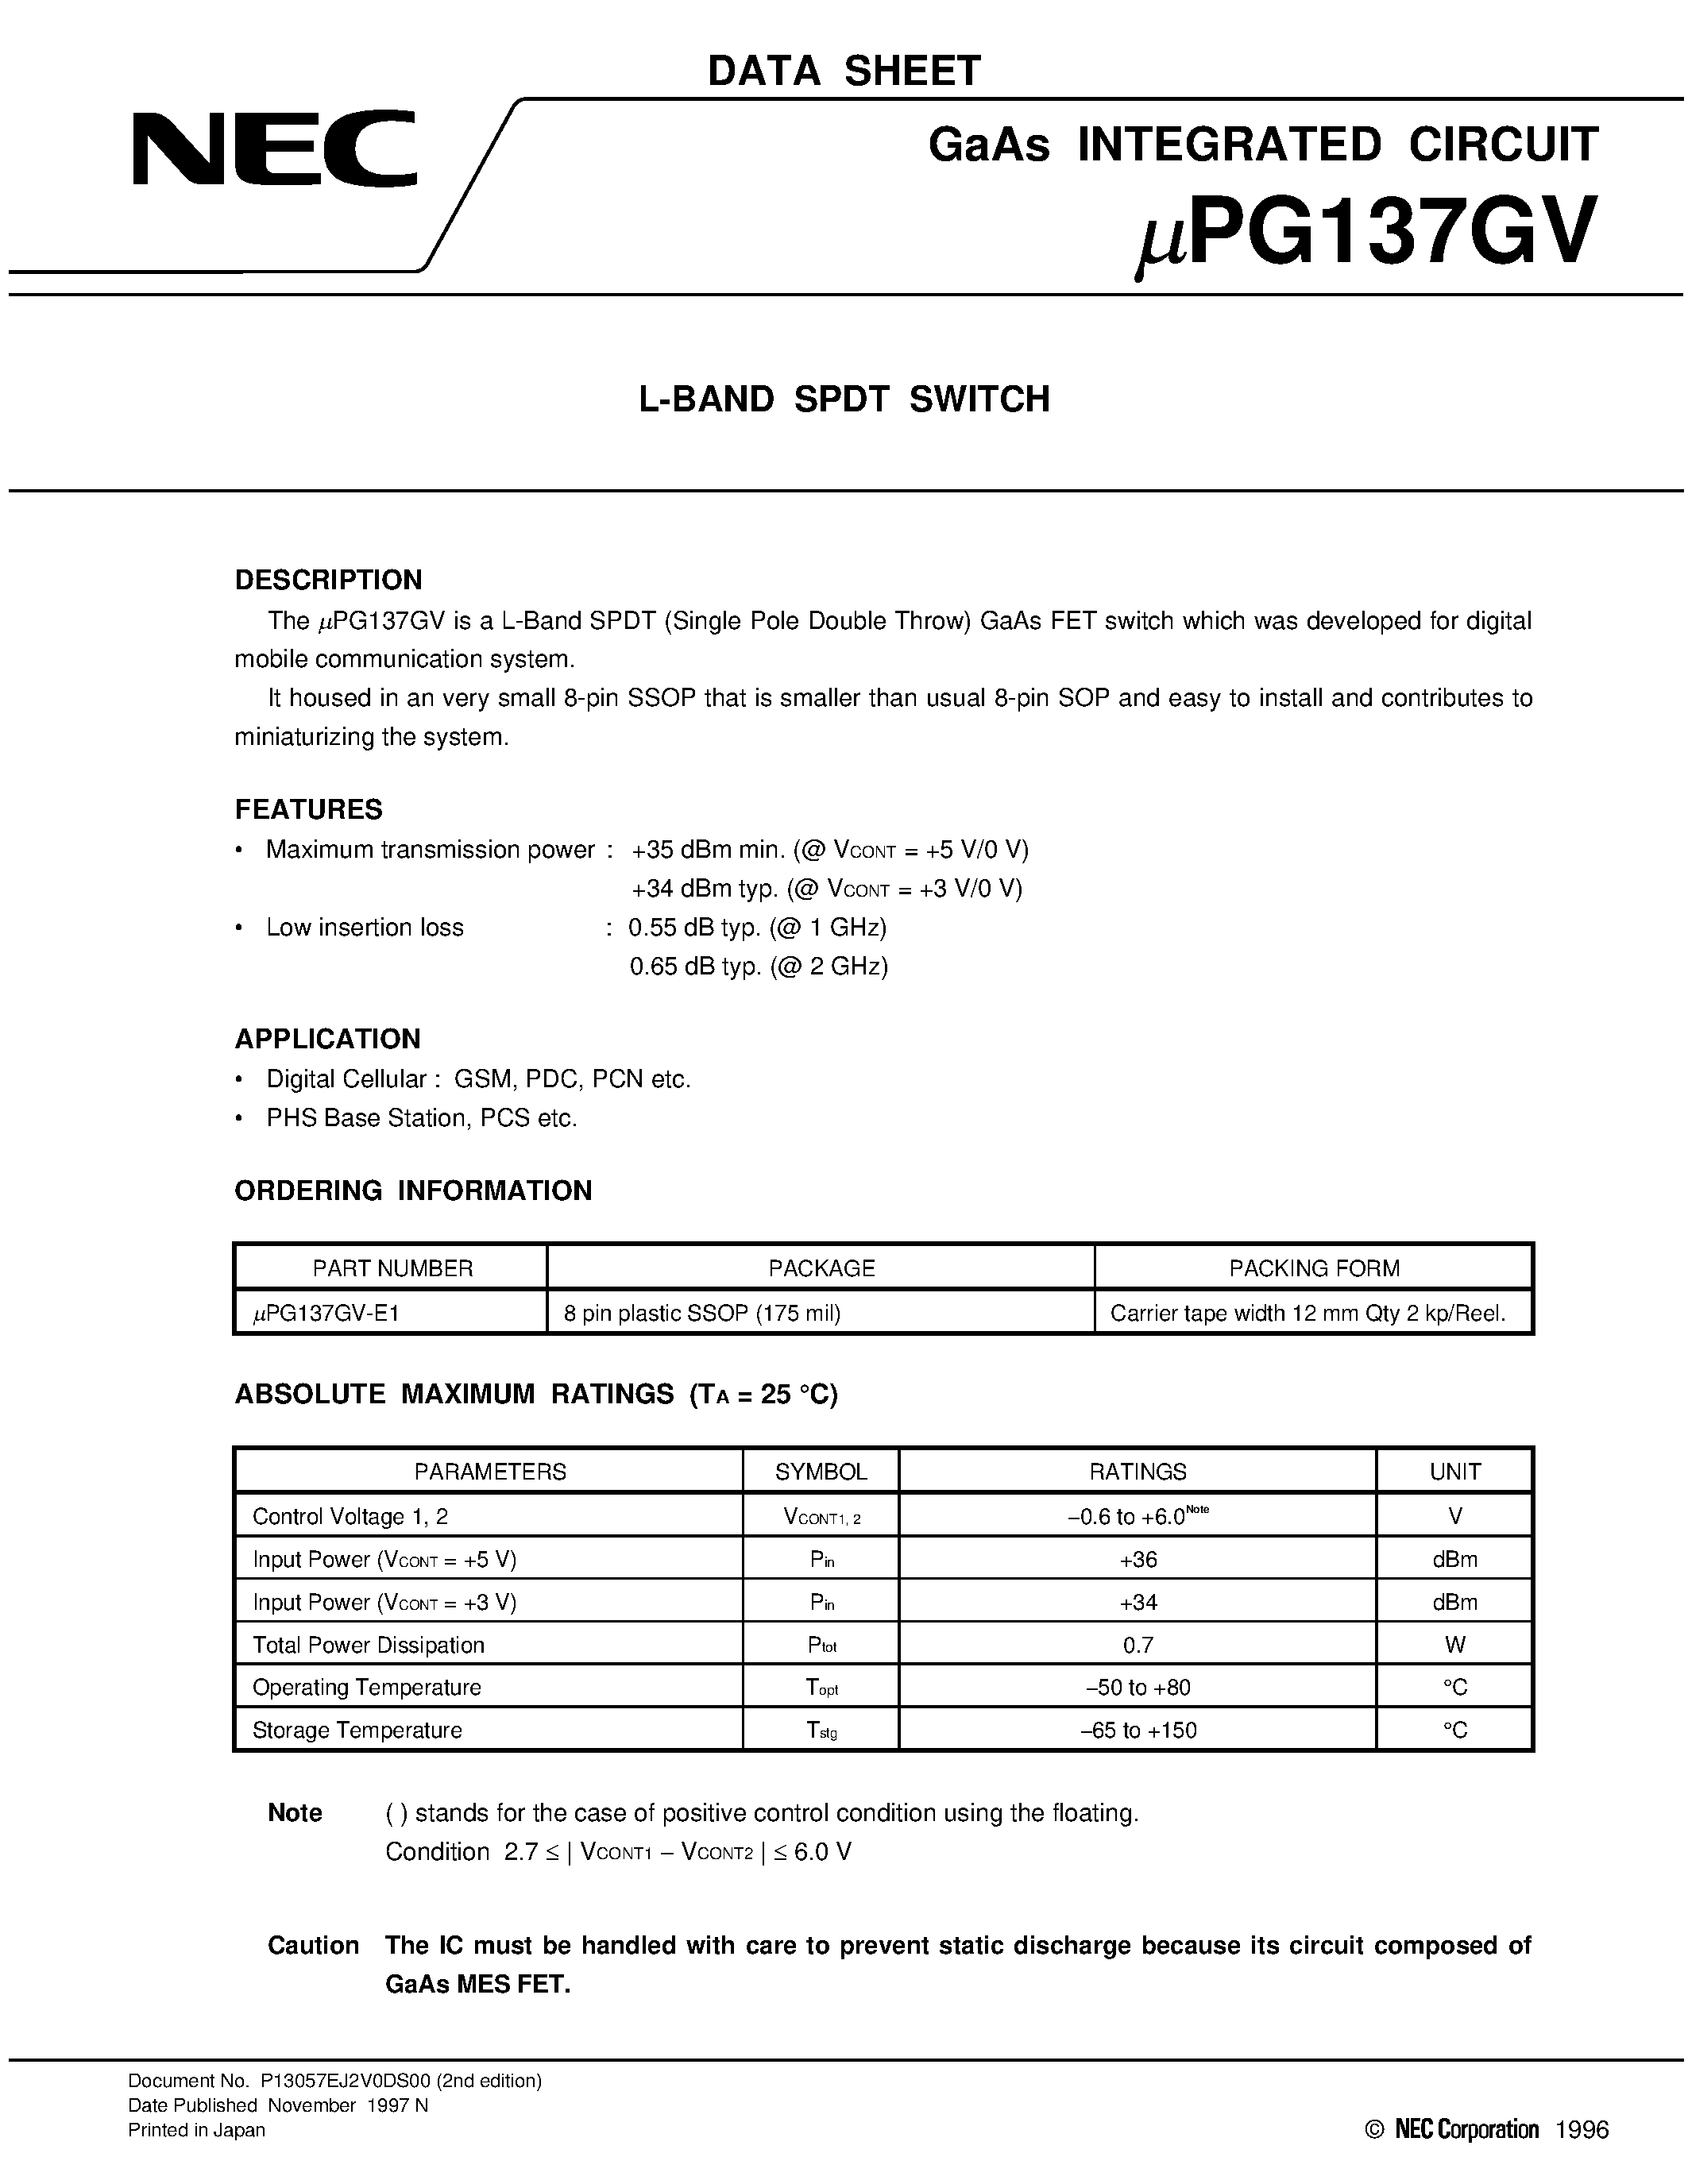 Datasheet UPG137GV - L-BAND DPDT MMIC SWITCH page 1